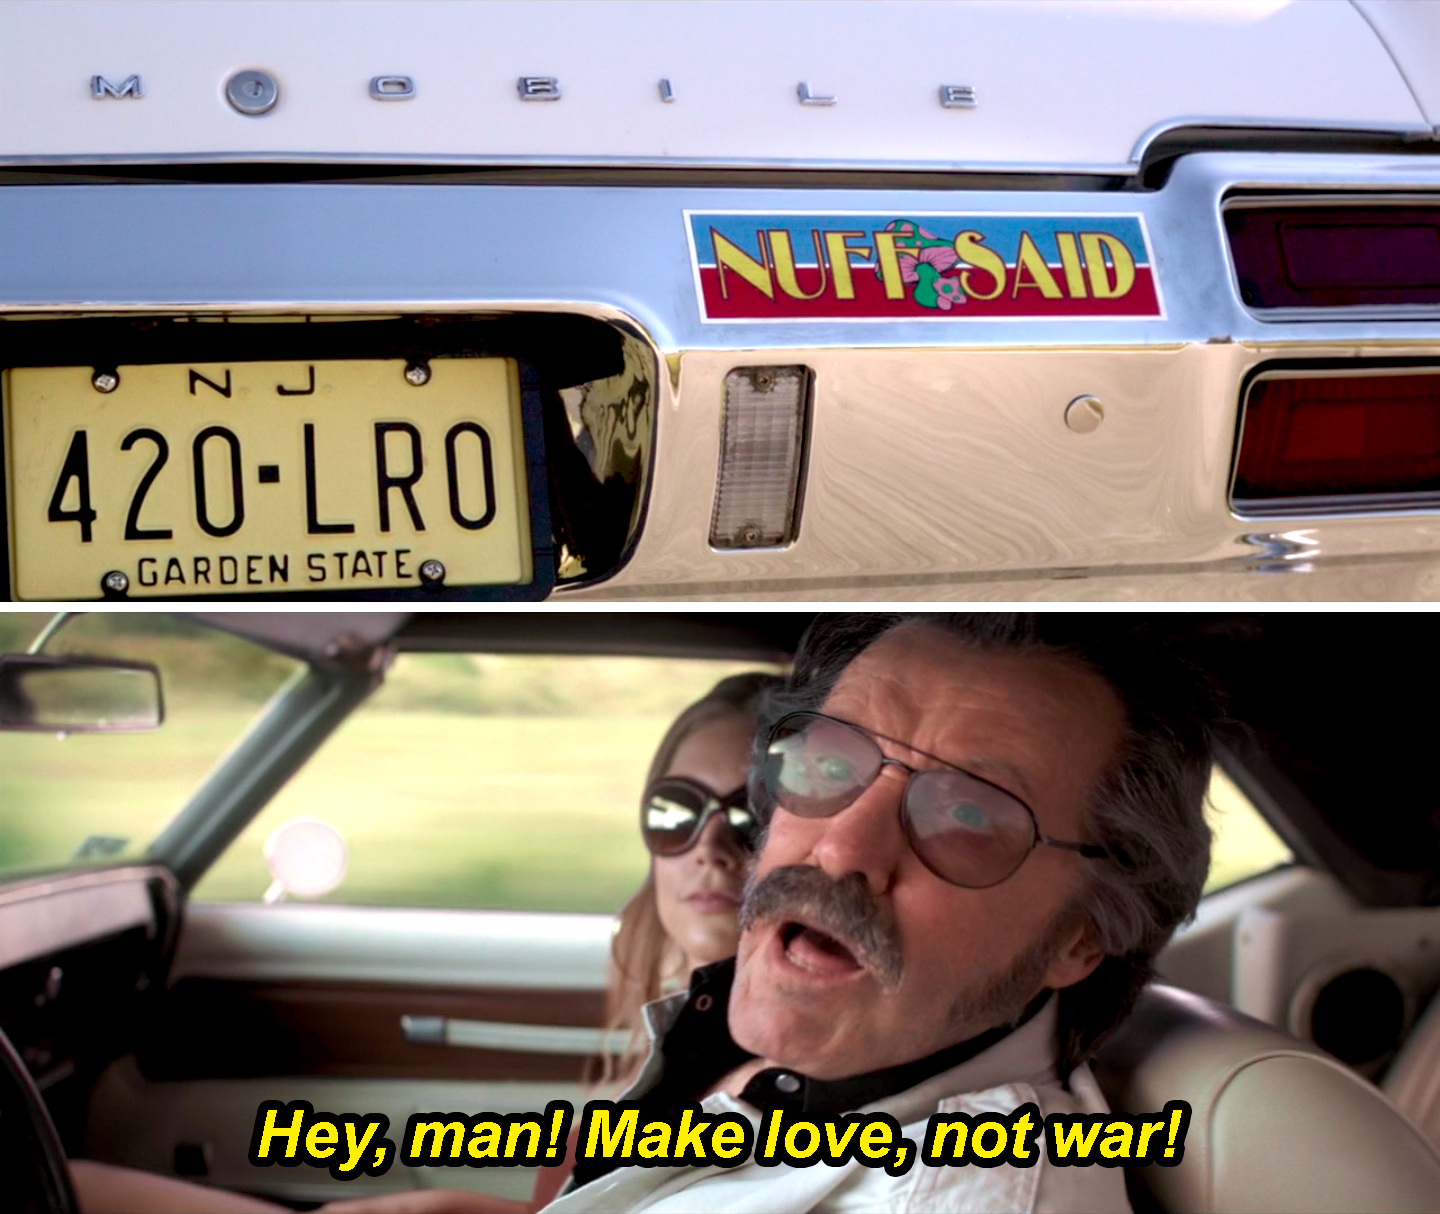 A younger Stan Lee driving a car with a &quot;Nuff said&quot; bumper sticker and yelling, &quot;Hey, man! Make love, not war!&quot;